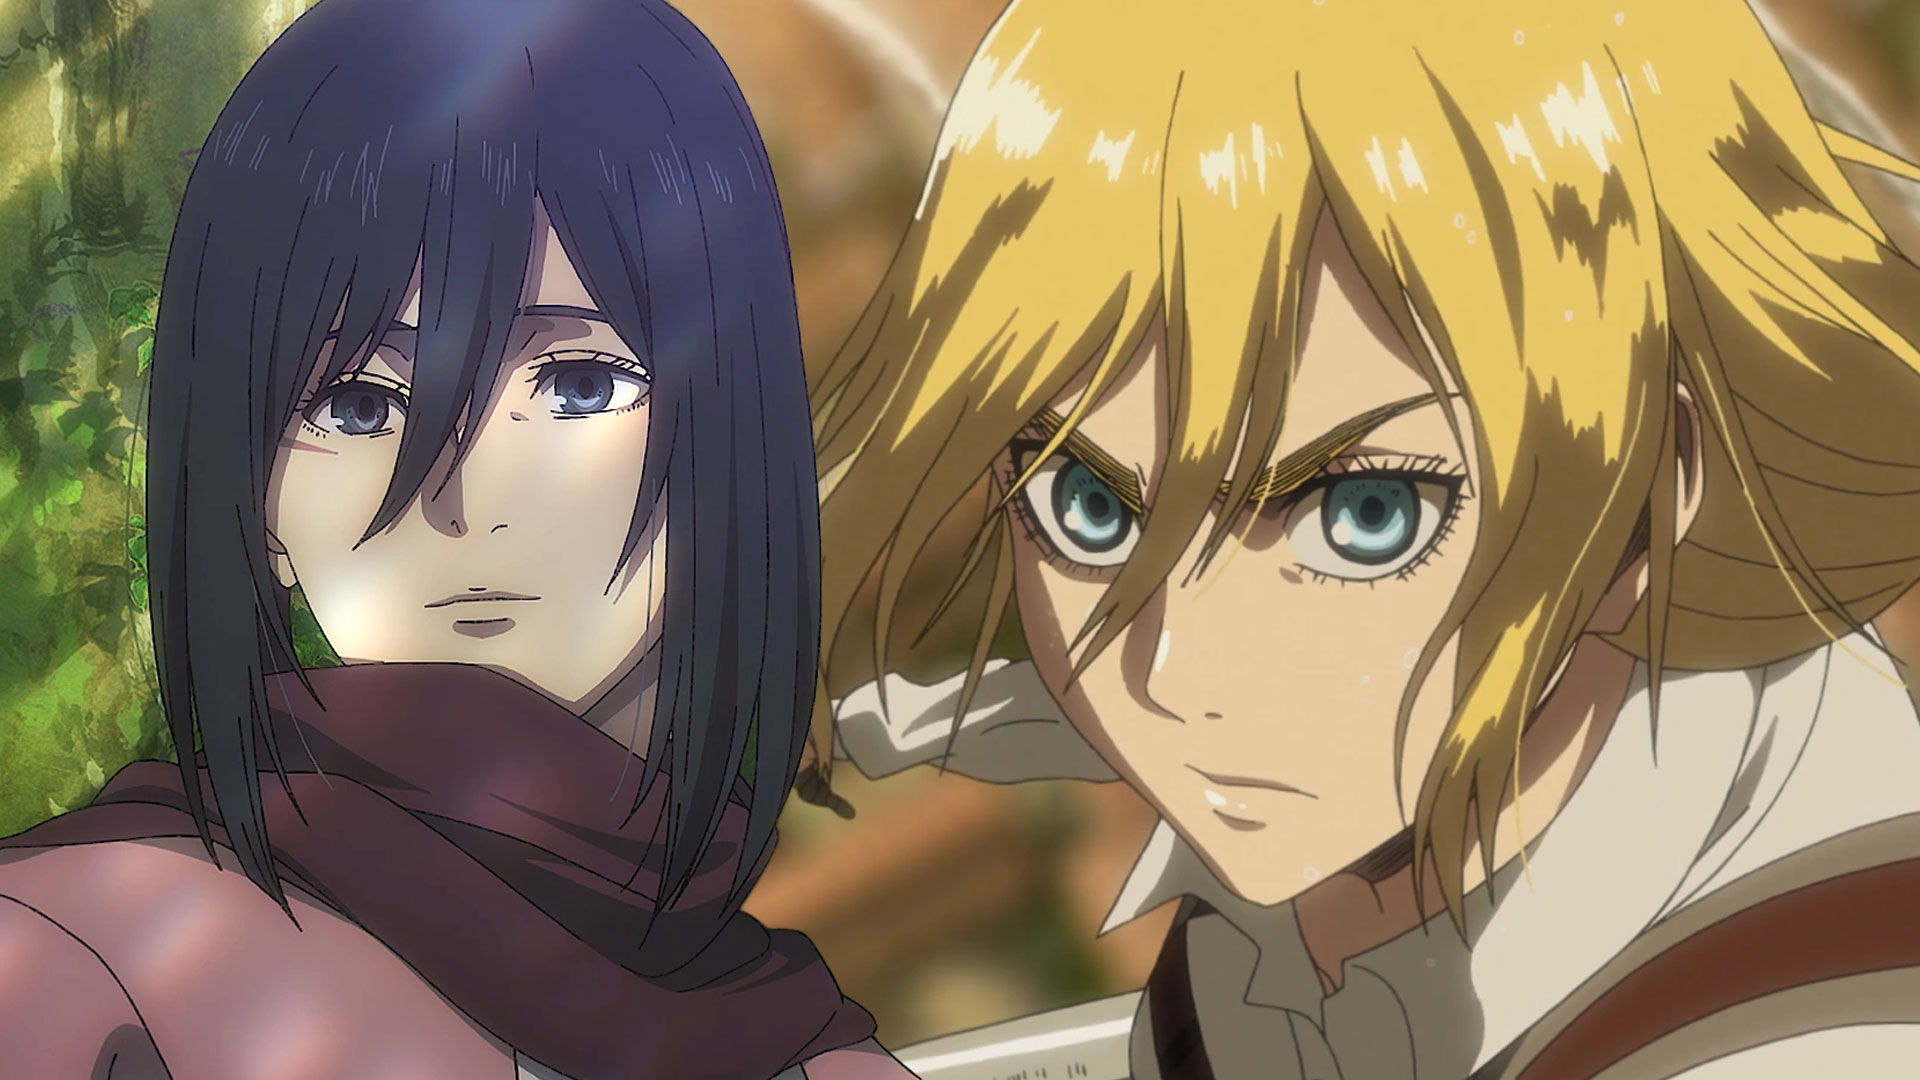 The Fiercest ‘Attack on Titan’ Conflict: Eren with Mikasa or Historia? (Shippers, You're Ready for This Talk)